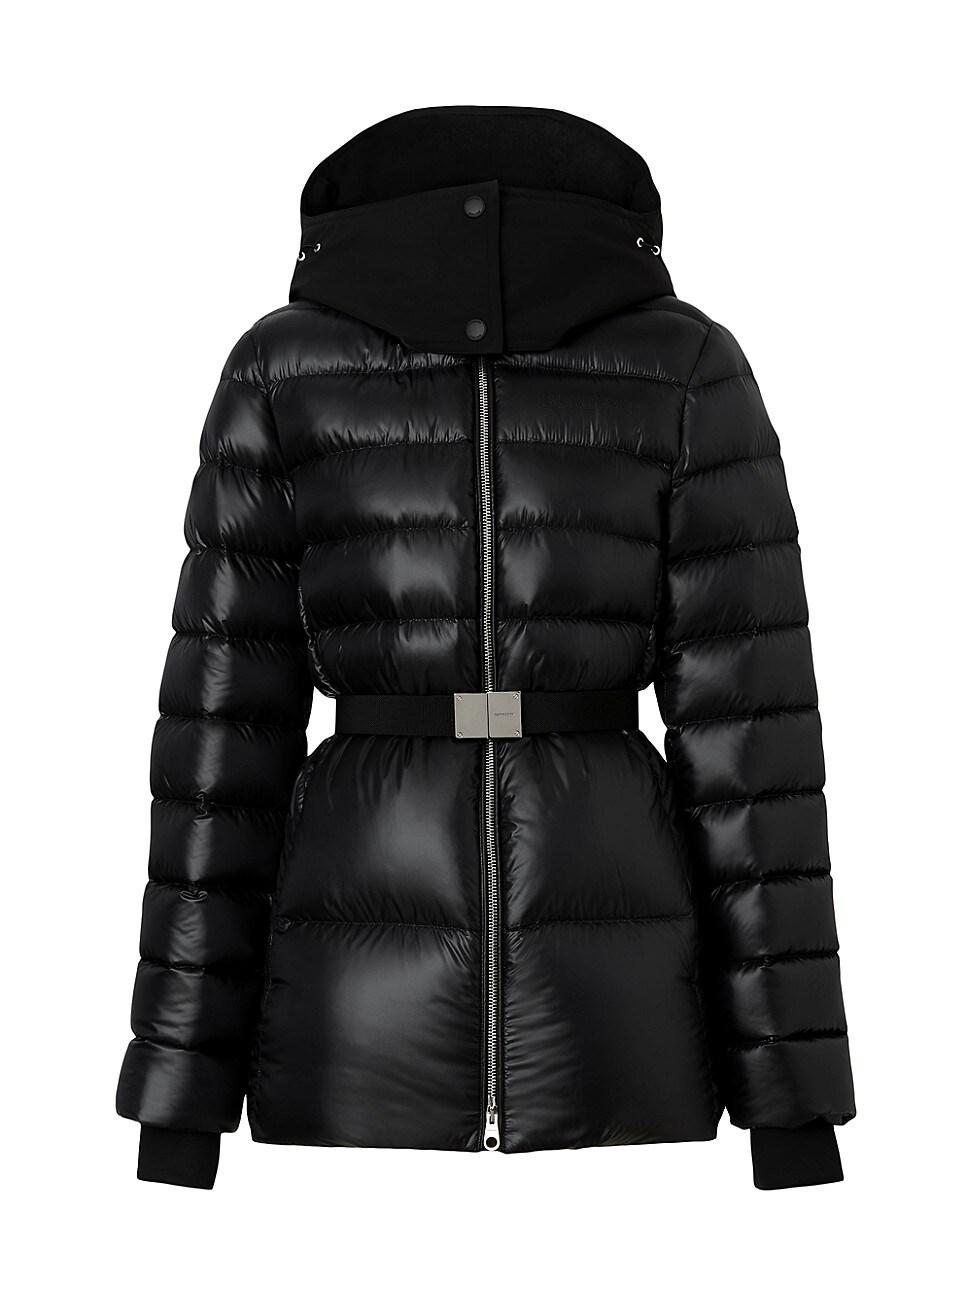 Burberry Burniston Puffer Jacket in Black | Lyst